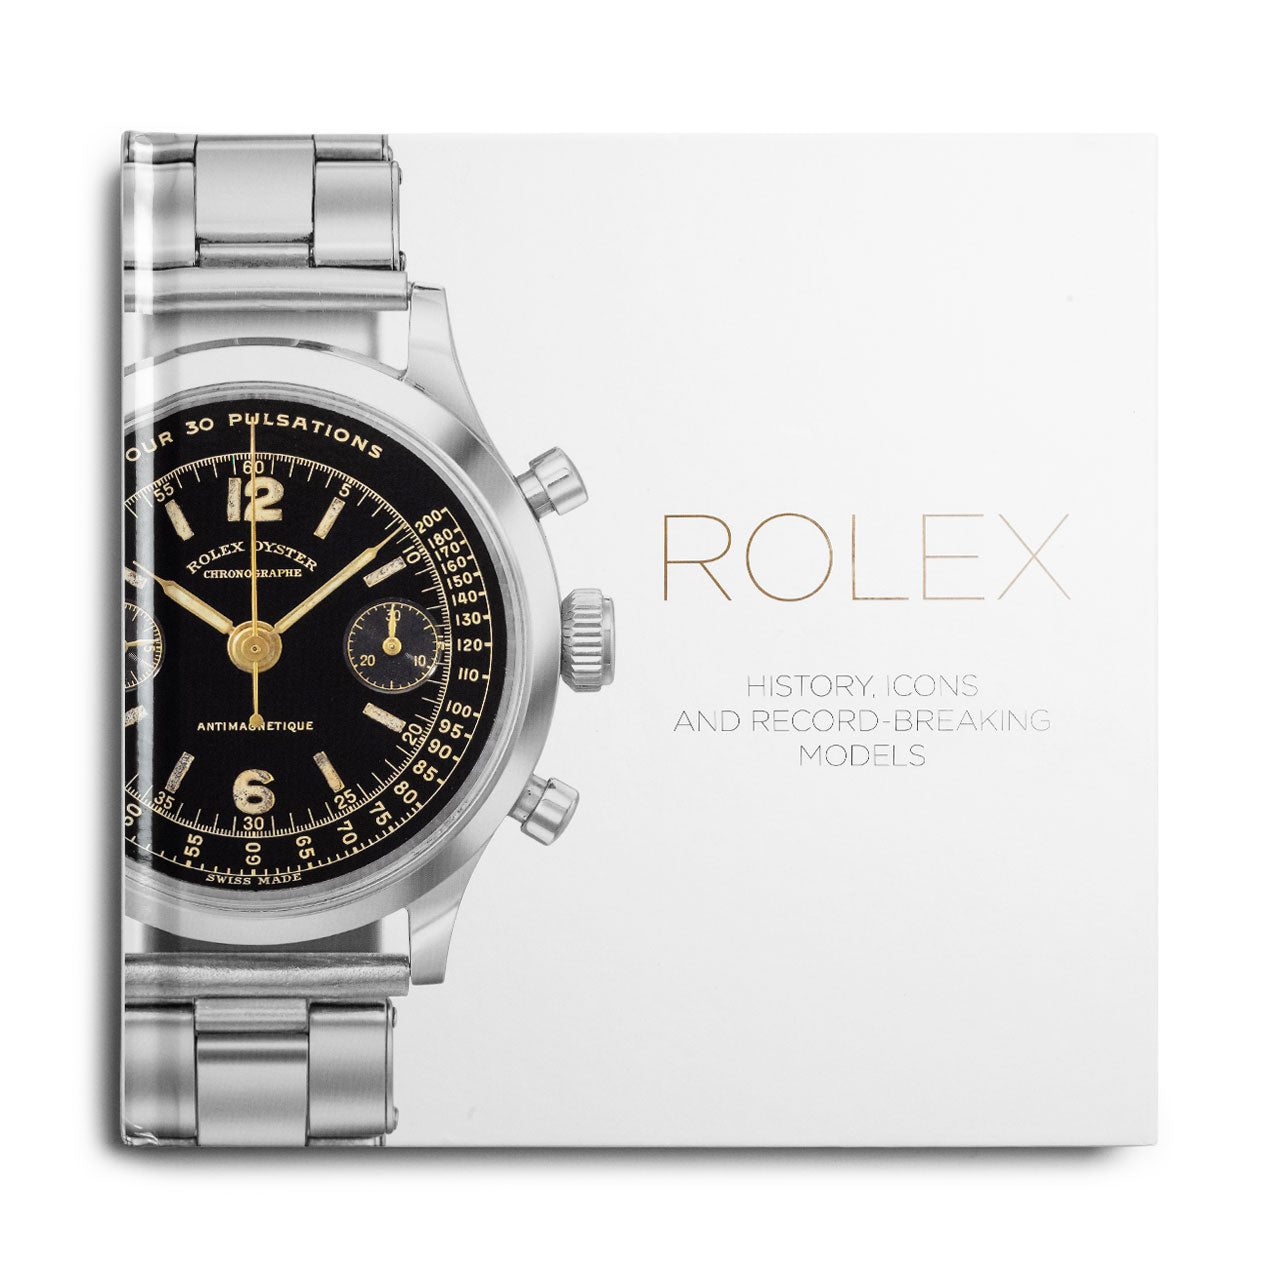 Rolex: History, Icons, and Record-Breaking Models